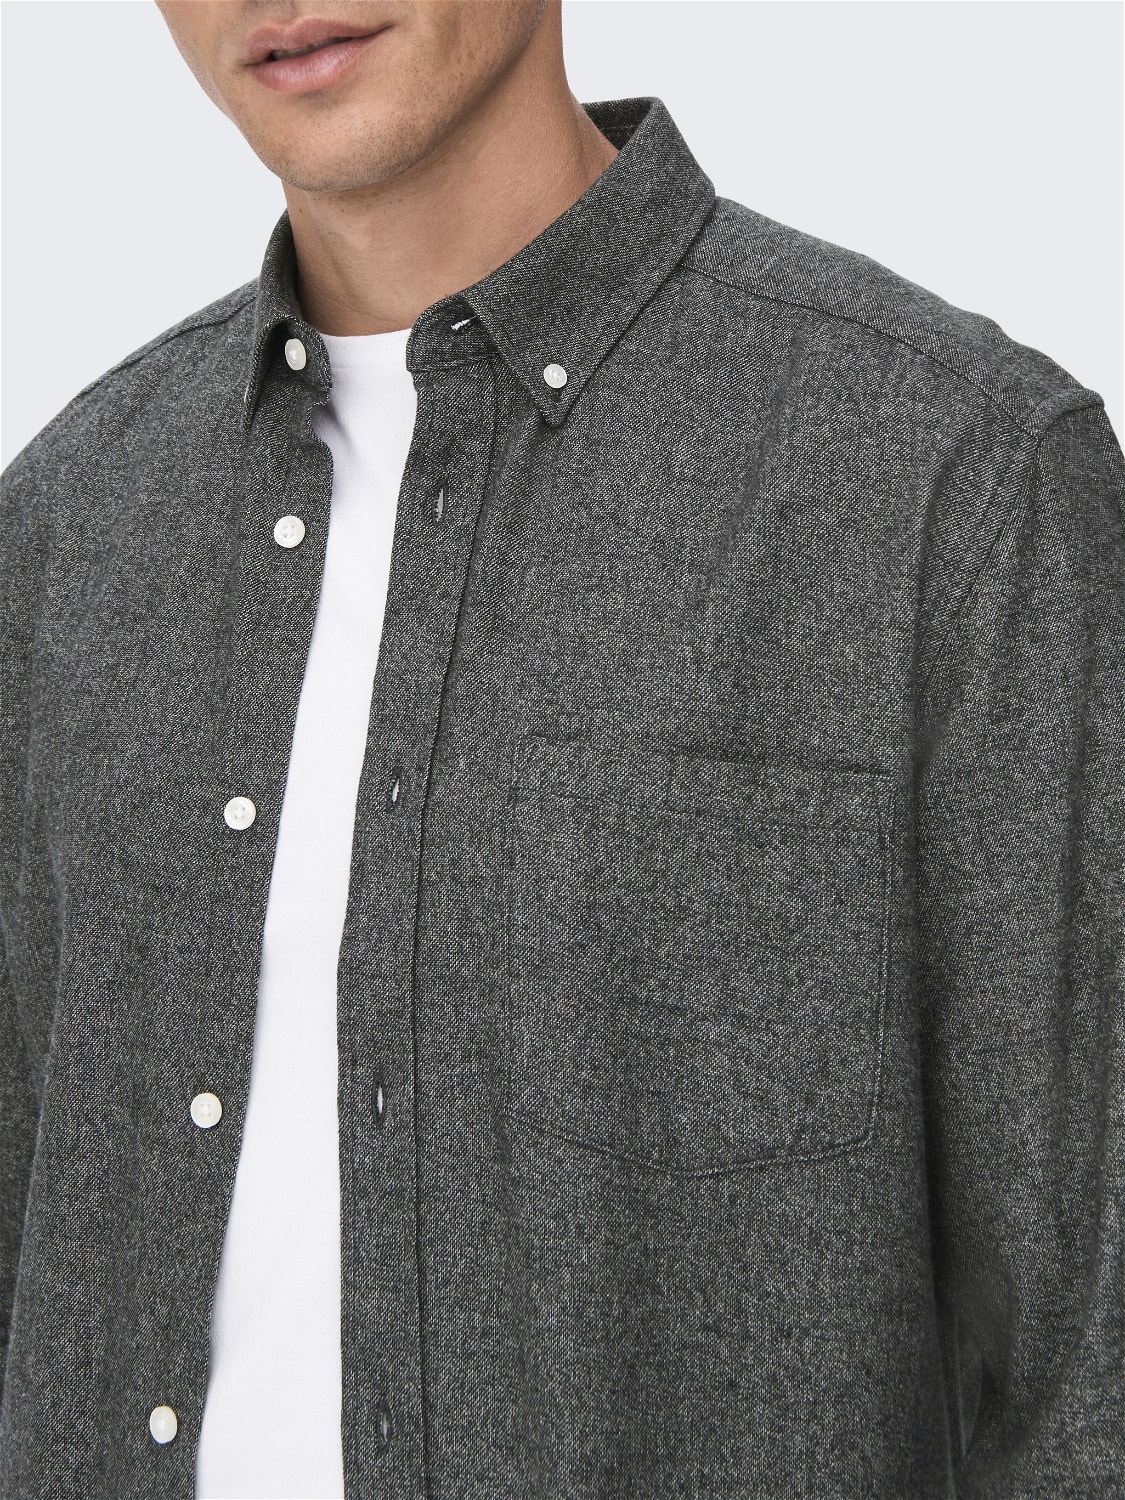 ONLY & SONS Classic shirt -Black - 22019878